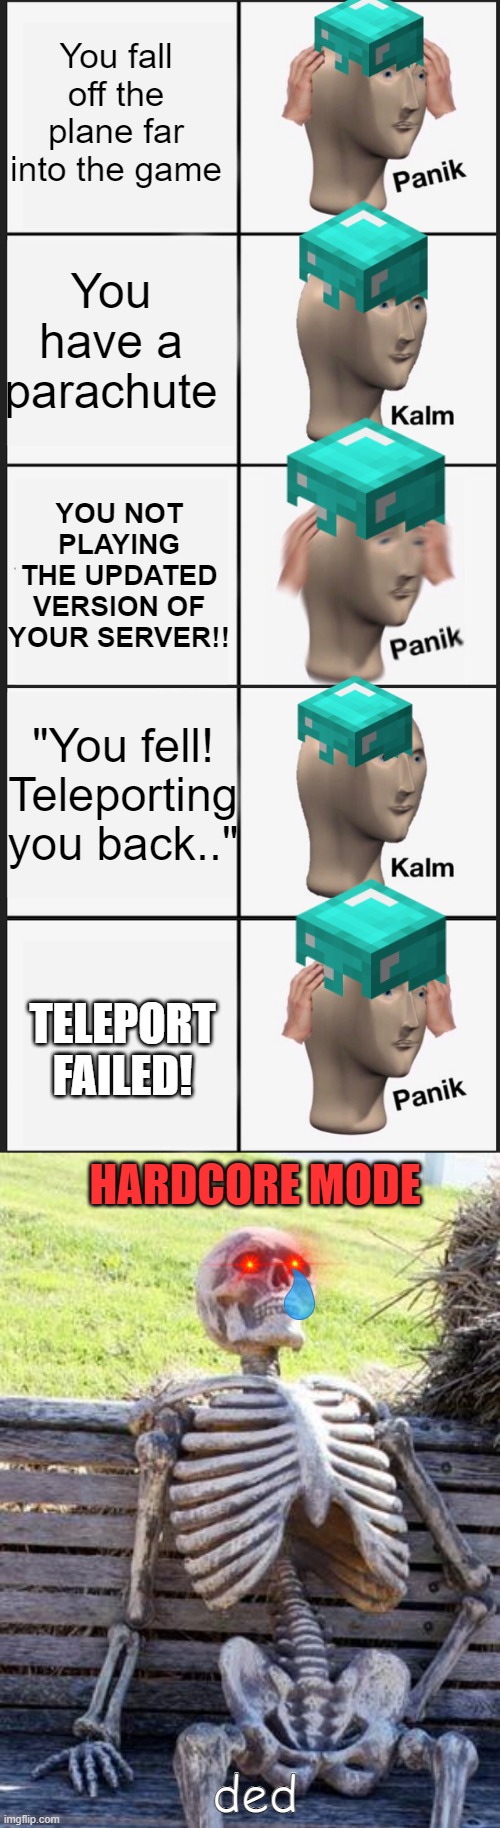 Plane game MC | You fall off the plane far into the game; You have a parachute; YOU NOT PLAYING THE UPDATED VERSION OF YOUR SERVER!! "You fell! Teleporting you back.."; TELEPORT FAILED! HARDCORE MODE; ded | image tagged in memes,panik kalm panik,waiting skeleton | made w/ Imgflip meme maker